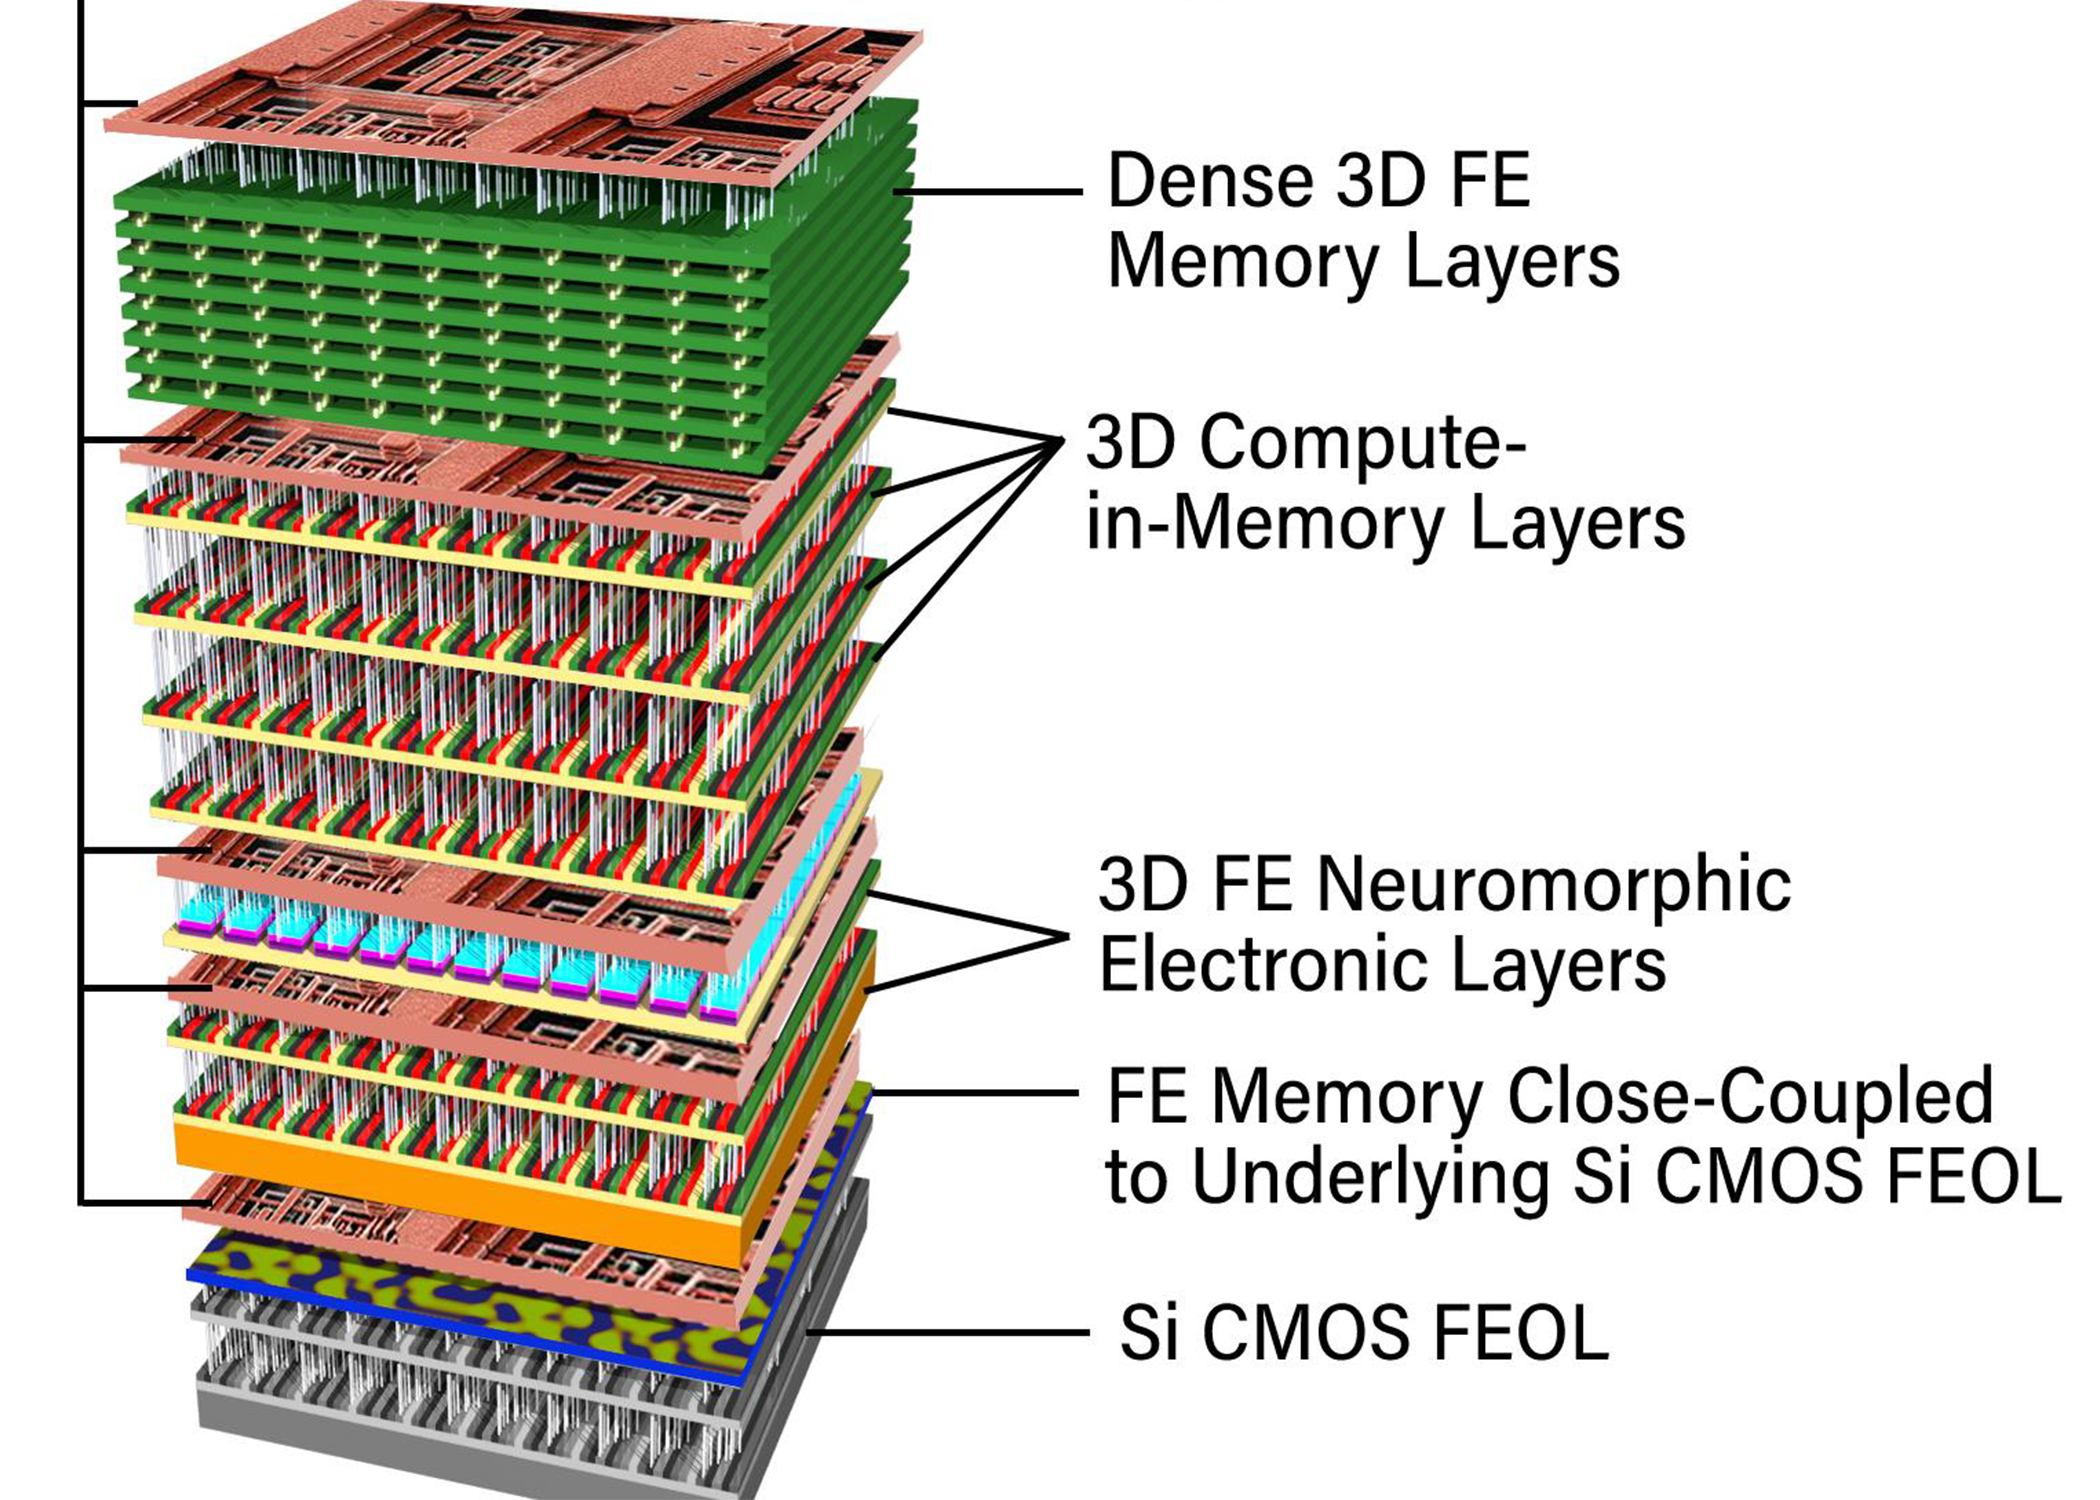 Illustration shows tall stack of many layers of different colors and textures, with labels like "Dense 3D FE Memory Layers."